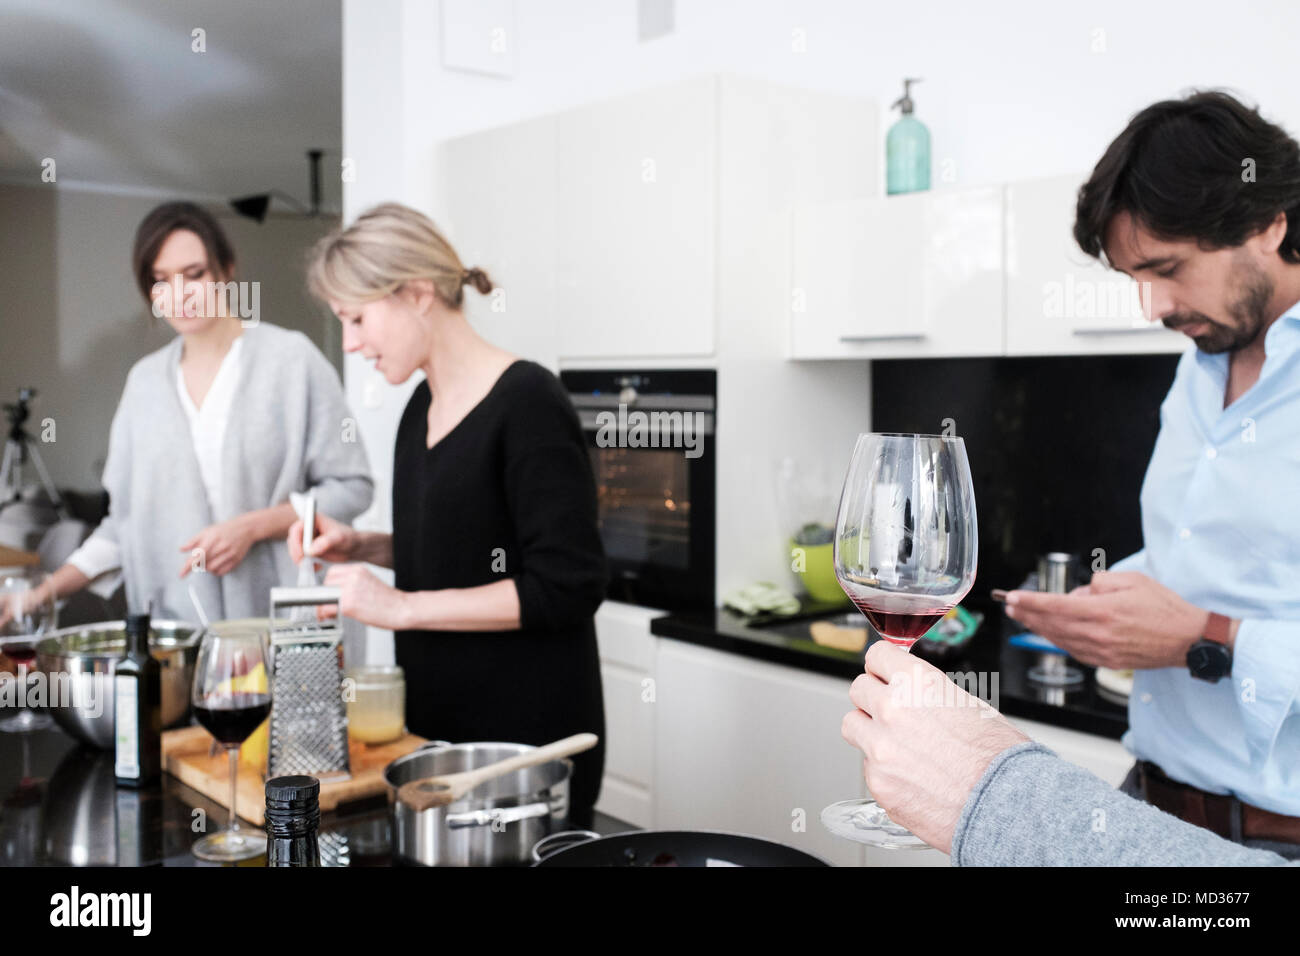 Selective focus.Group of friends casually snacking on a selection of food  and drinking red wine,while laughing and enjoying themselves. Stock Photo